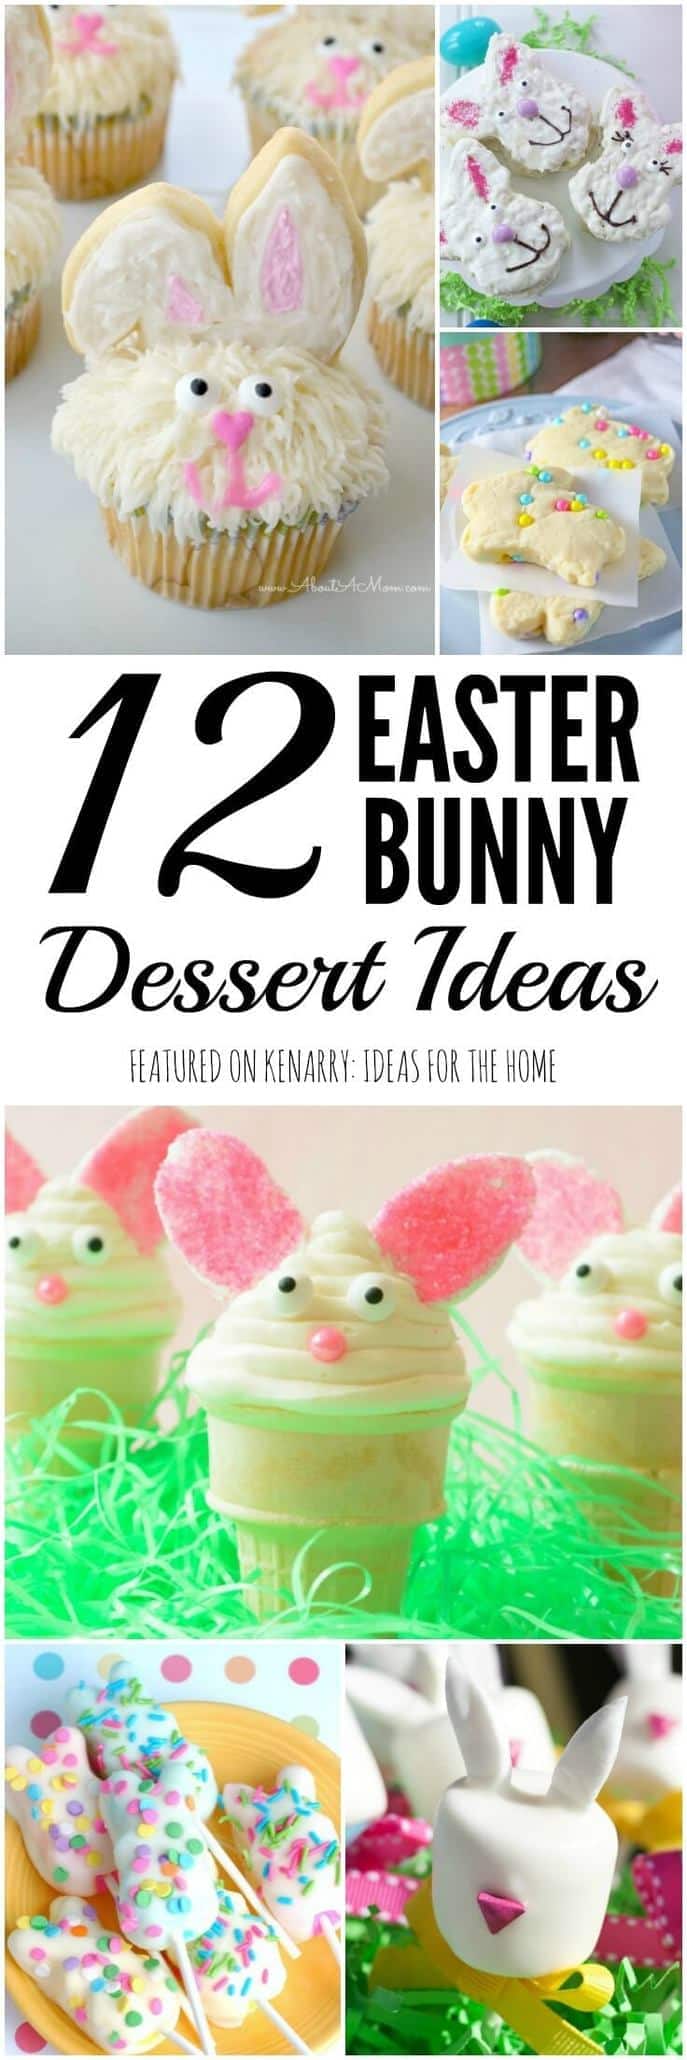 Kids will love these Easter Bunny Recipes! Any of these rabbit shaped treats would be a delicious idea to serve as a dessert at an Easter party.